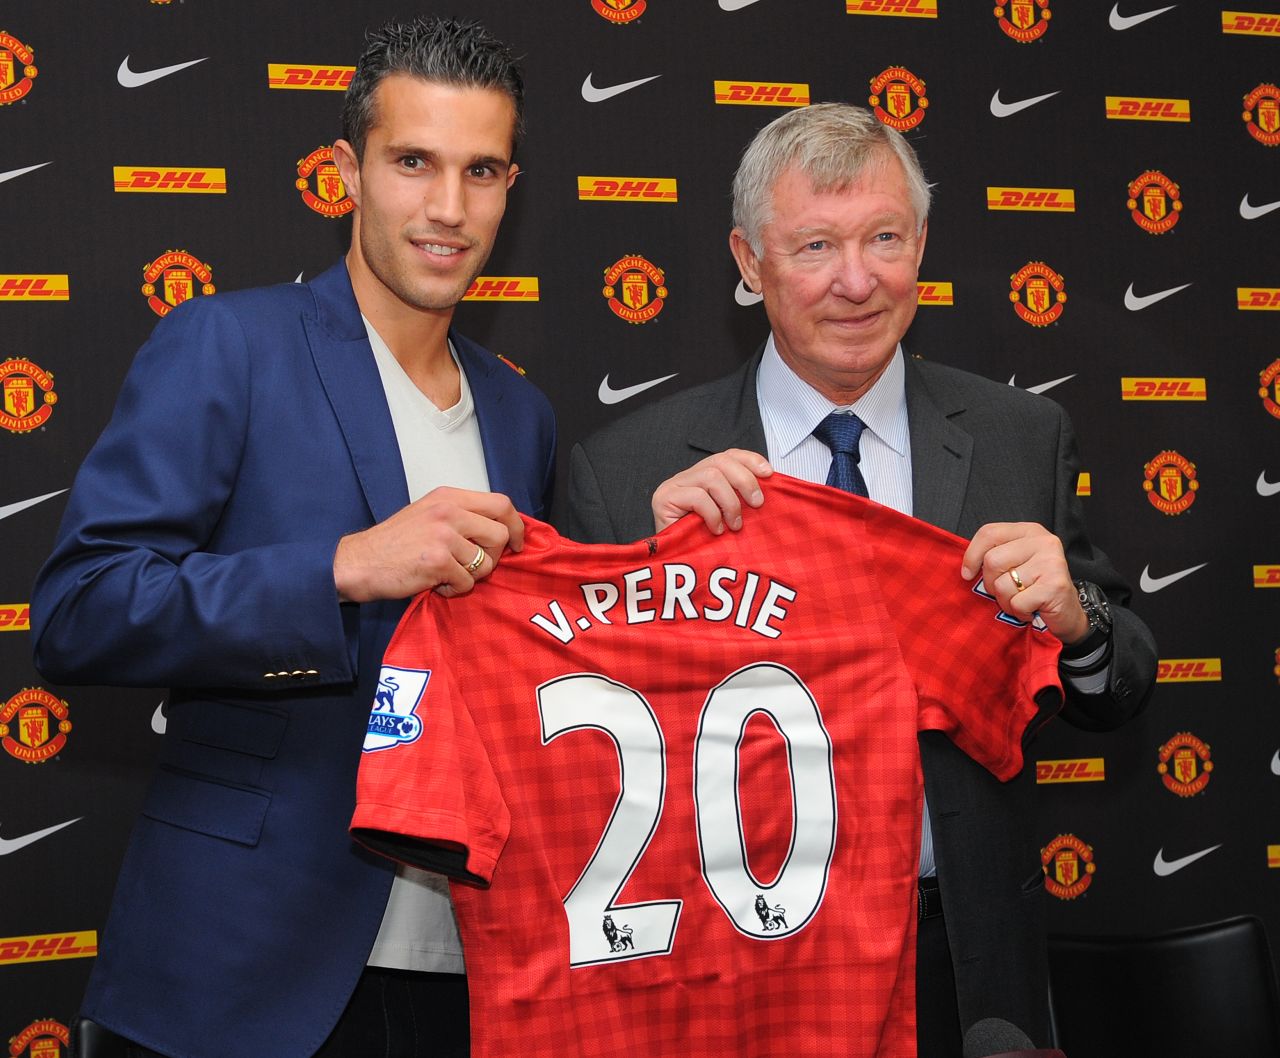 Of all the players that have come and gone during Wegner's reign, none vocalized more displeasure while still employed by the club than Van Persie. The 2012 Premier League Golden Boot winner with Arsenal repeated the feat the following season with Manchester United -- where he transferred for £26.1 million -- to go along with a Premier League title. Arsenal did not have another 30-goal scorer until Alexis Sanchez pulled the feat in 2016-2017. 